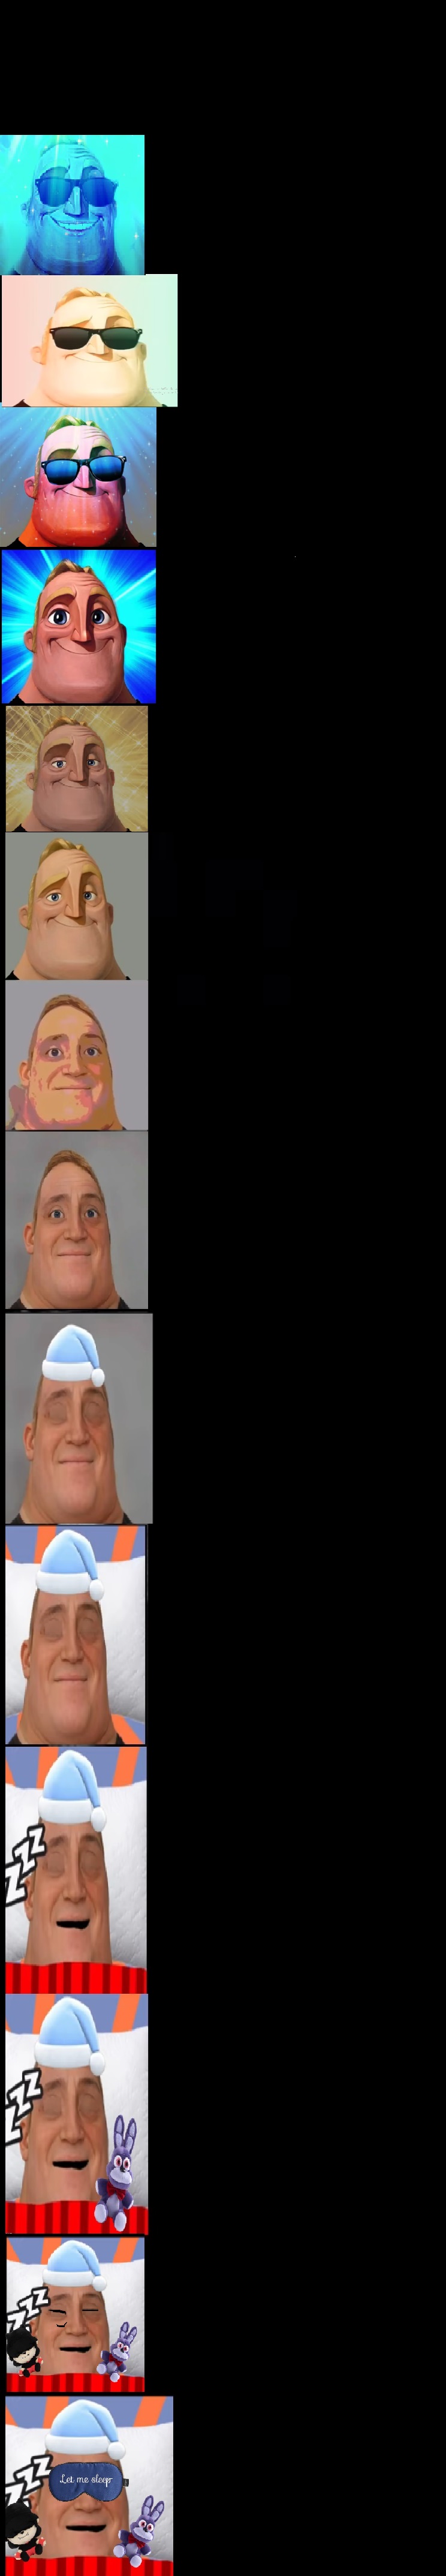 High Quality mr incredible becoming sleepy very extended Blank Meme Template